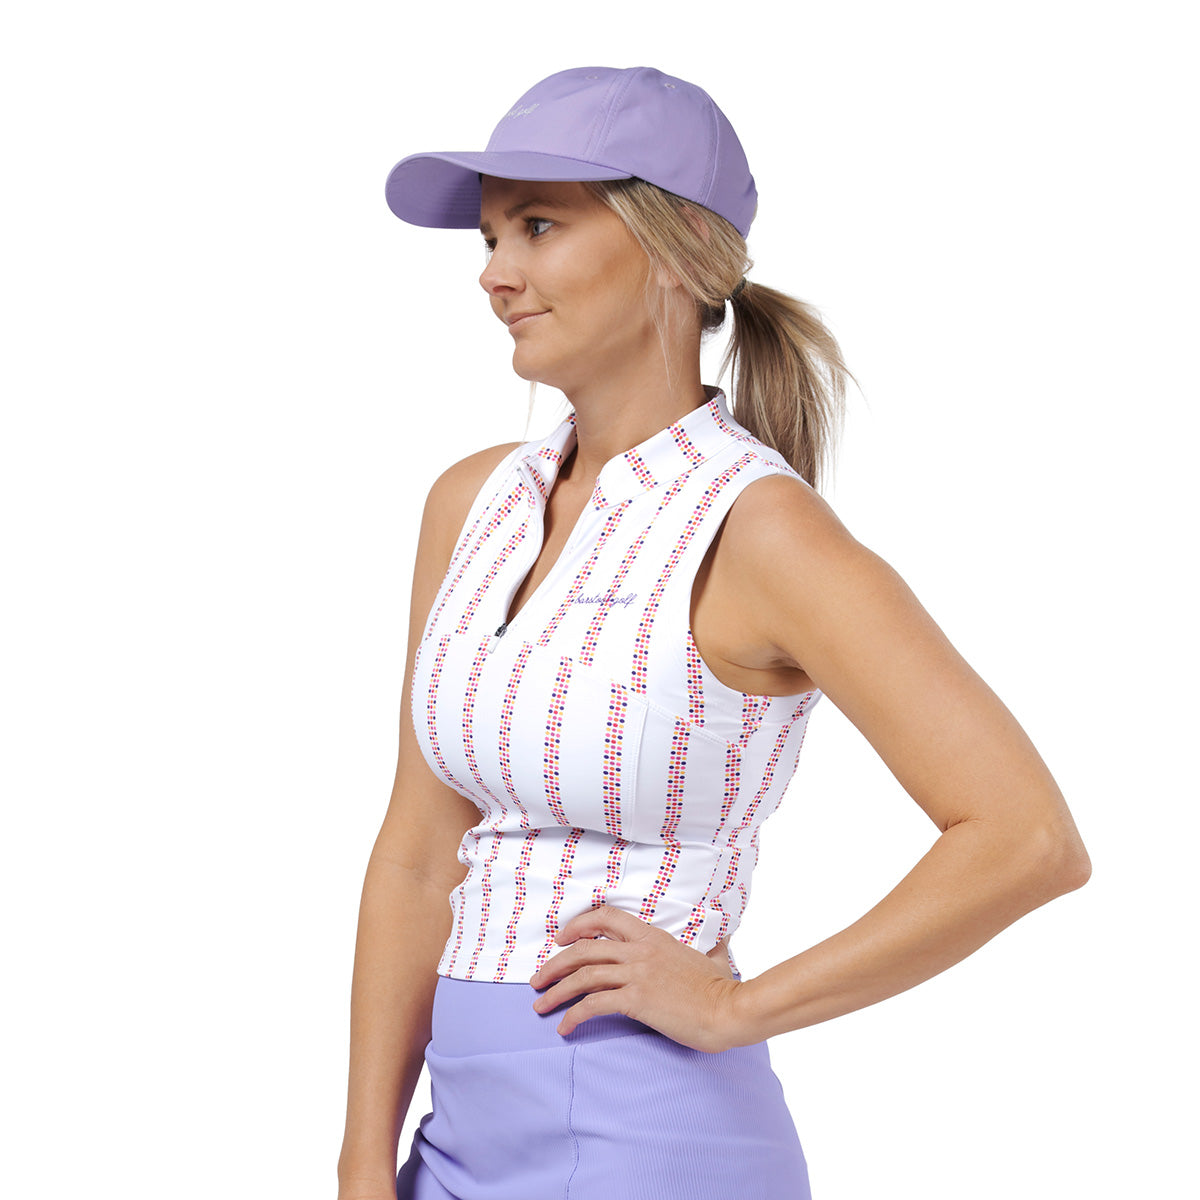 Barstool Golf Women's Dad Hat II-Hats-Fore Play-Barstool Sports